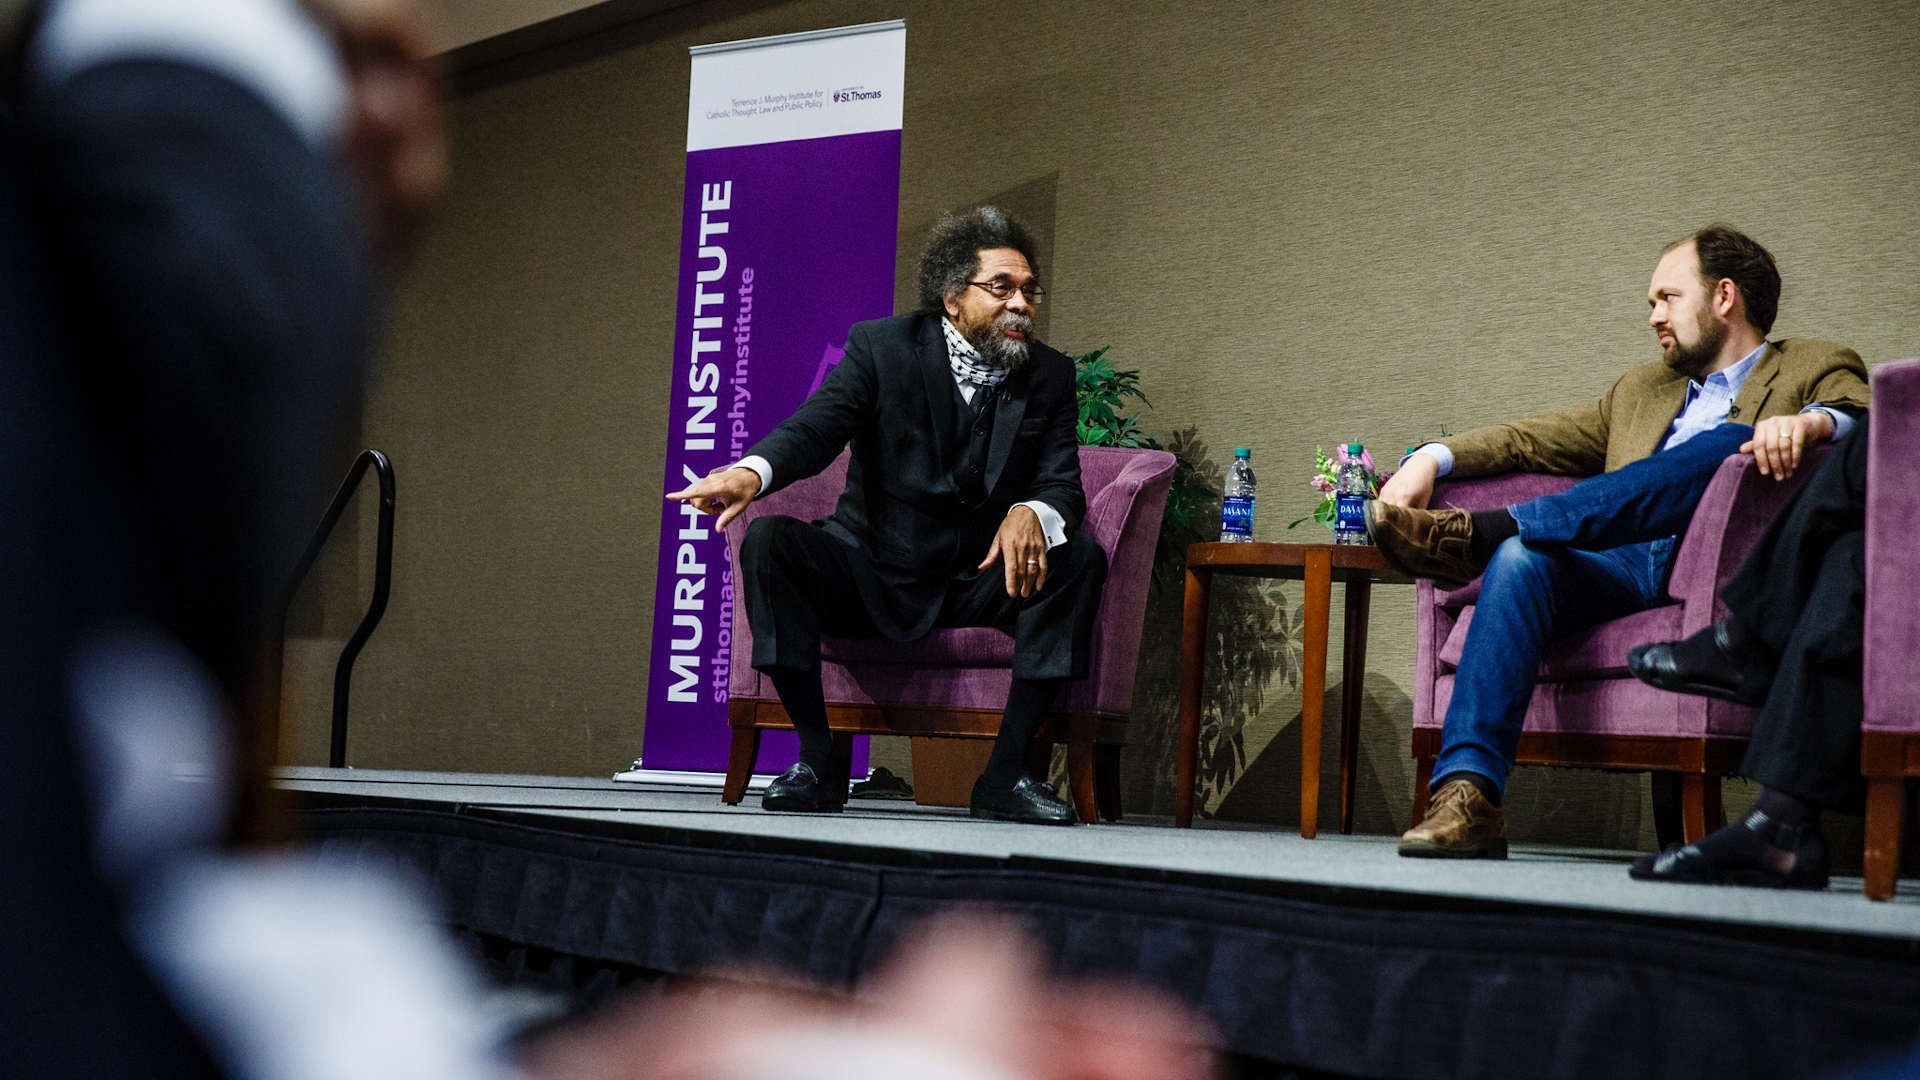 Cornell West and Ross Douthat talk during a panel discussion.